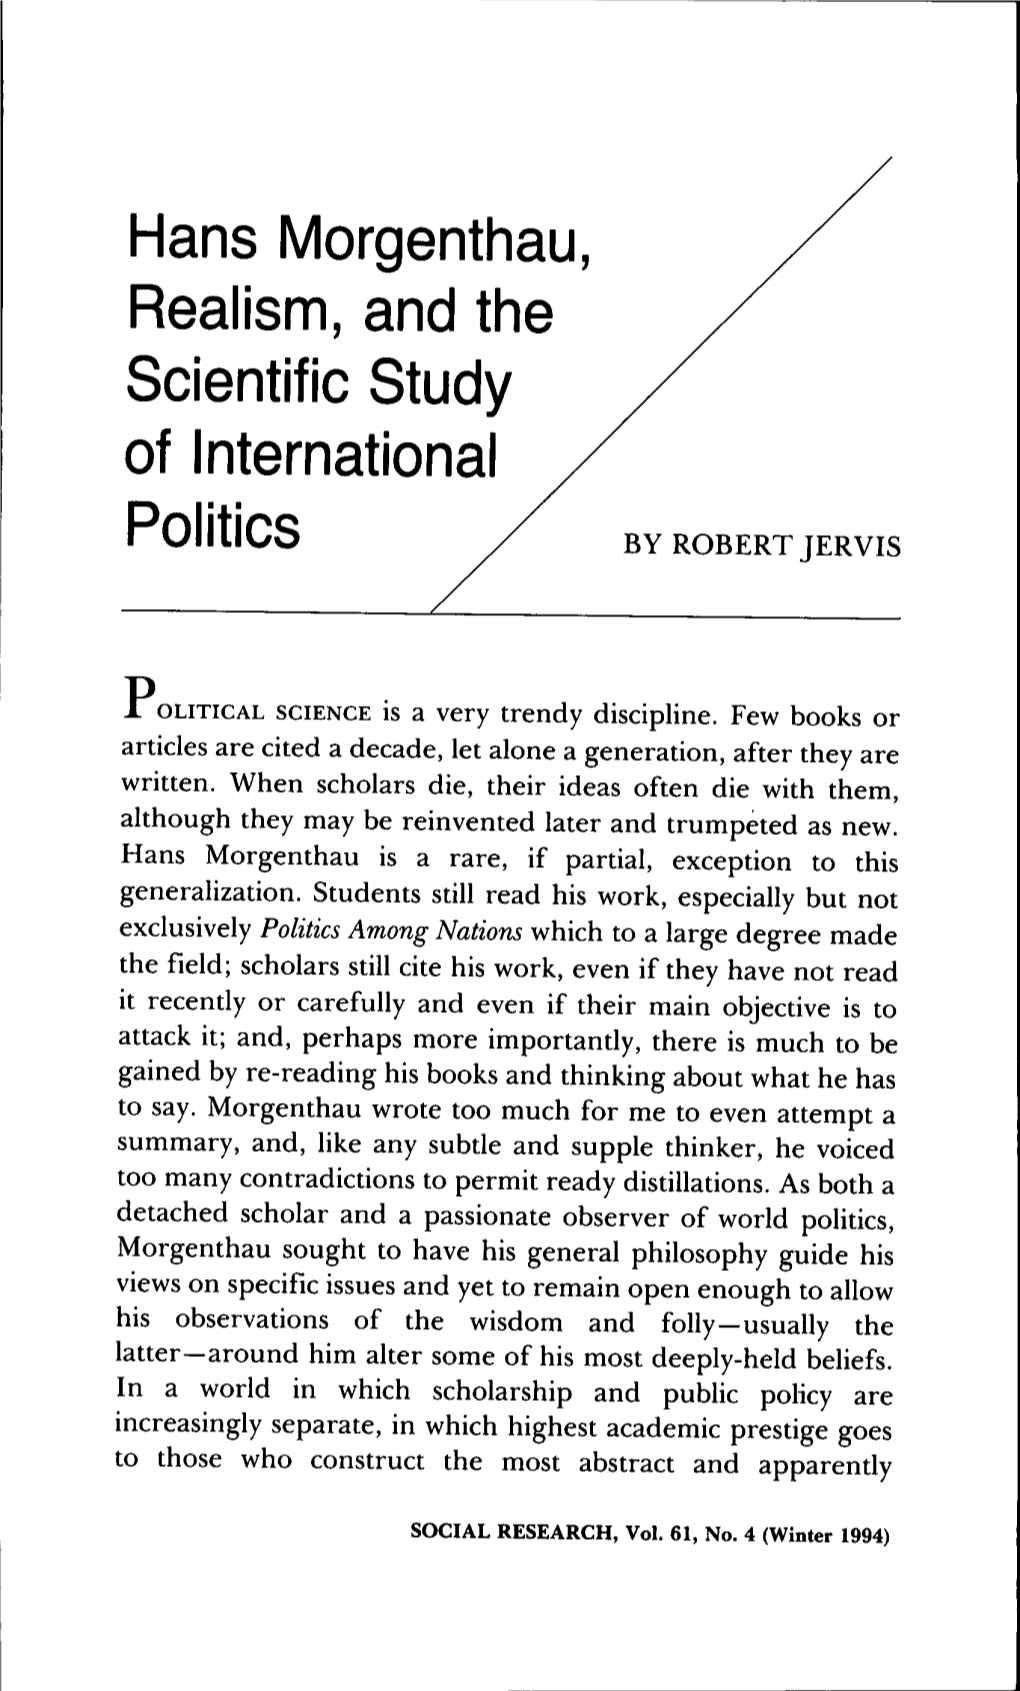 Hans Morgenthau, Realism, and the Scientific Study of International